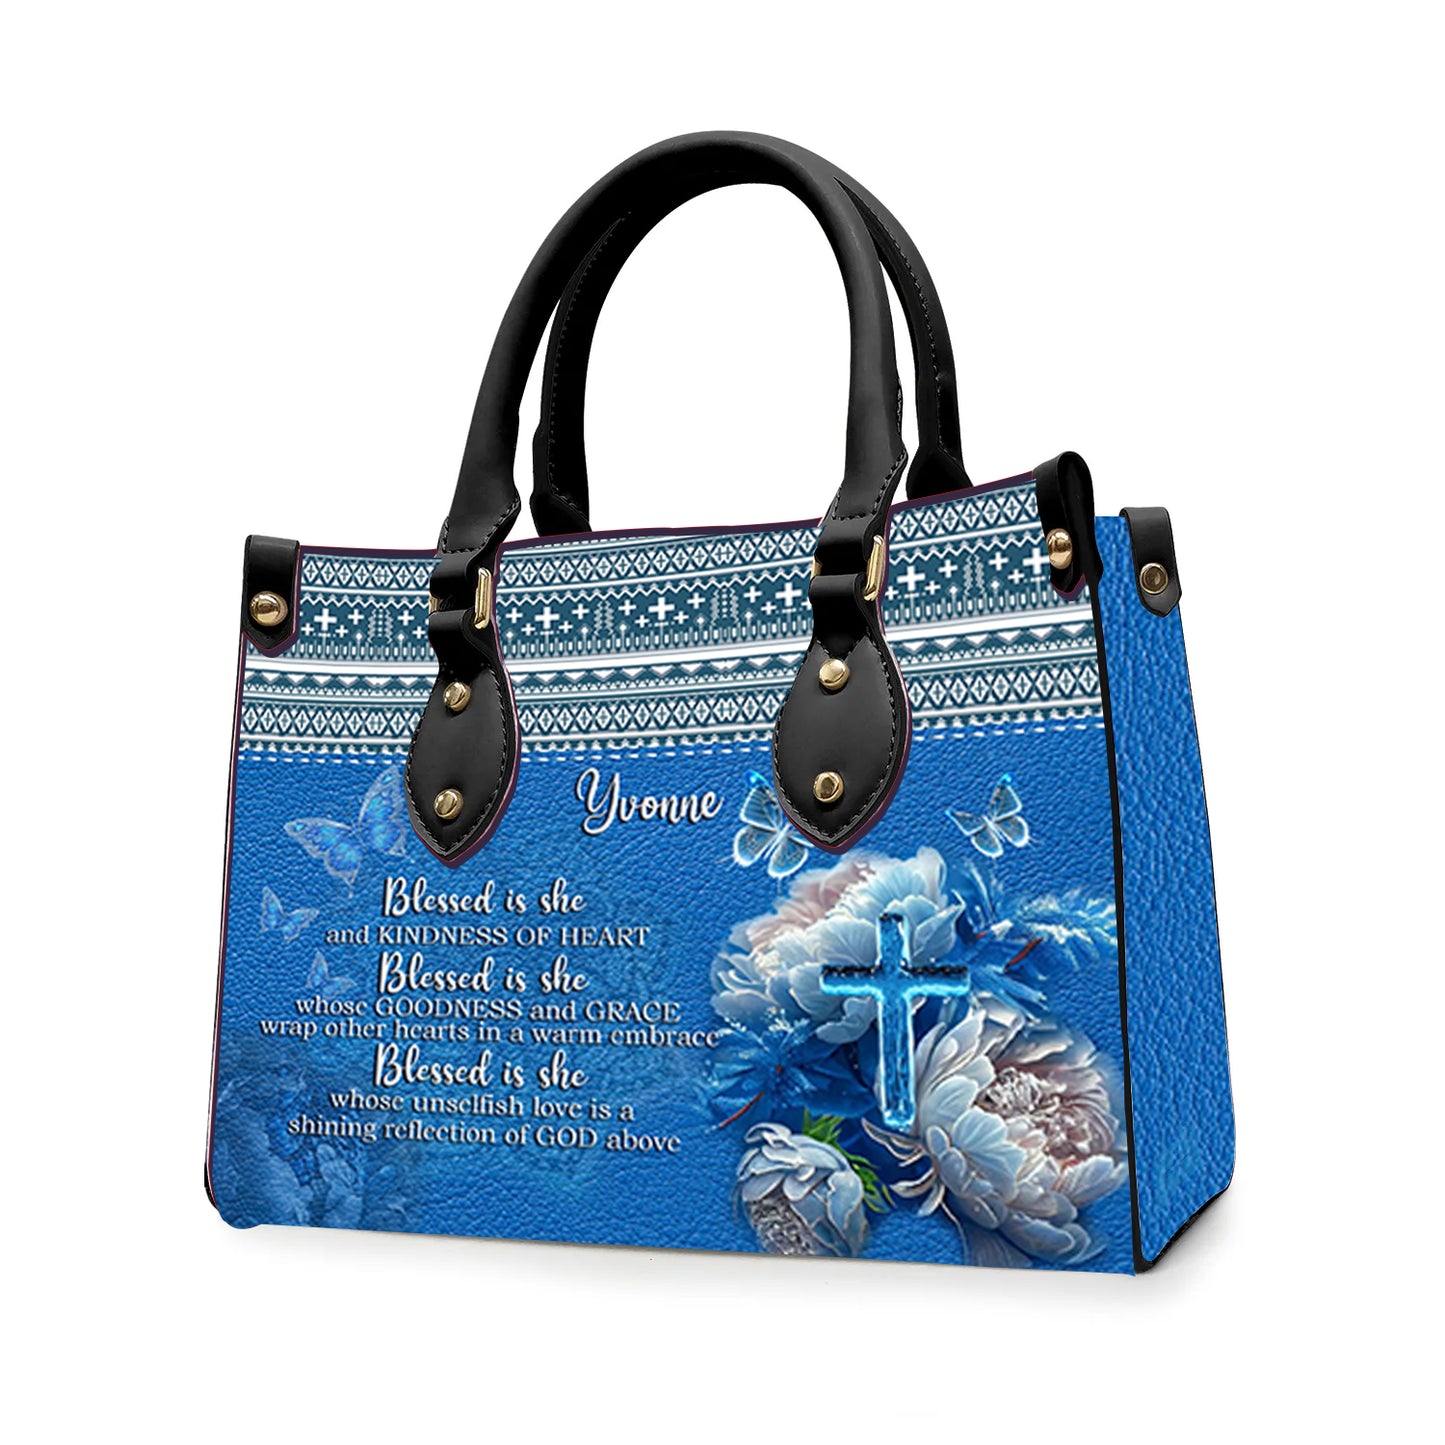 Christianartbag Handbags, Blessed Is She Leather Handbag Blue, Personalized Bags, Gifts for Women, Christmas Gift, CABLTB01290923. - Christian Art Bag